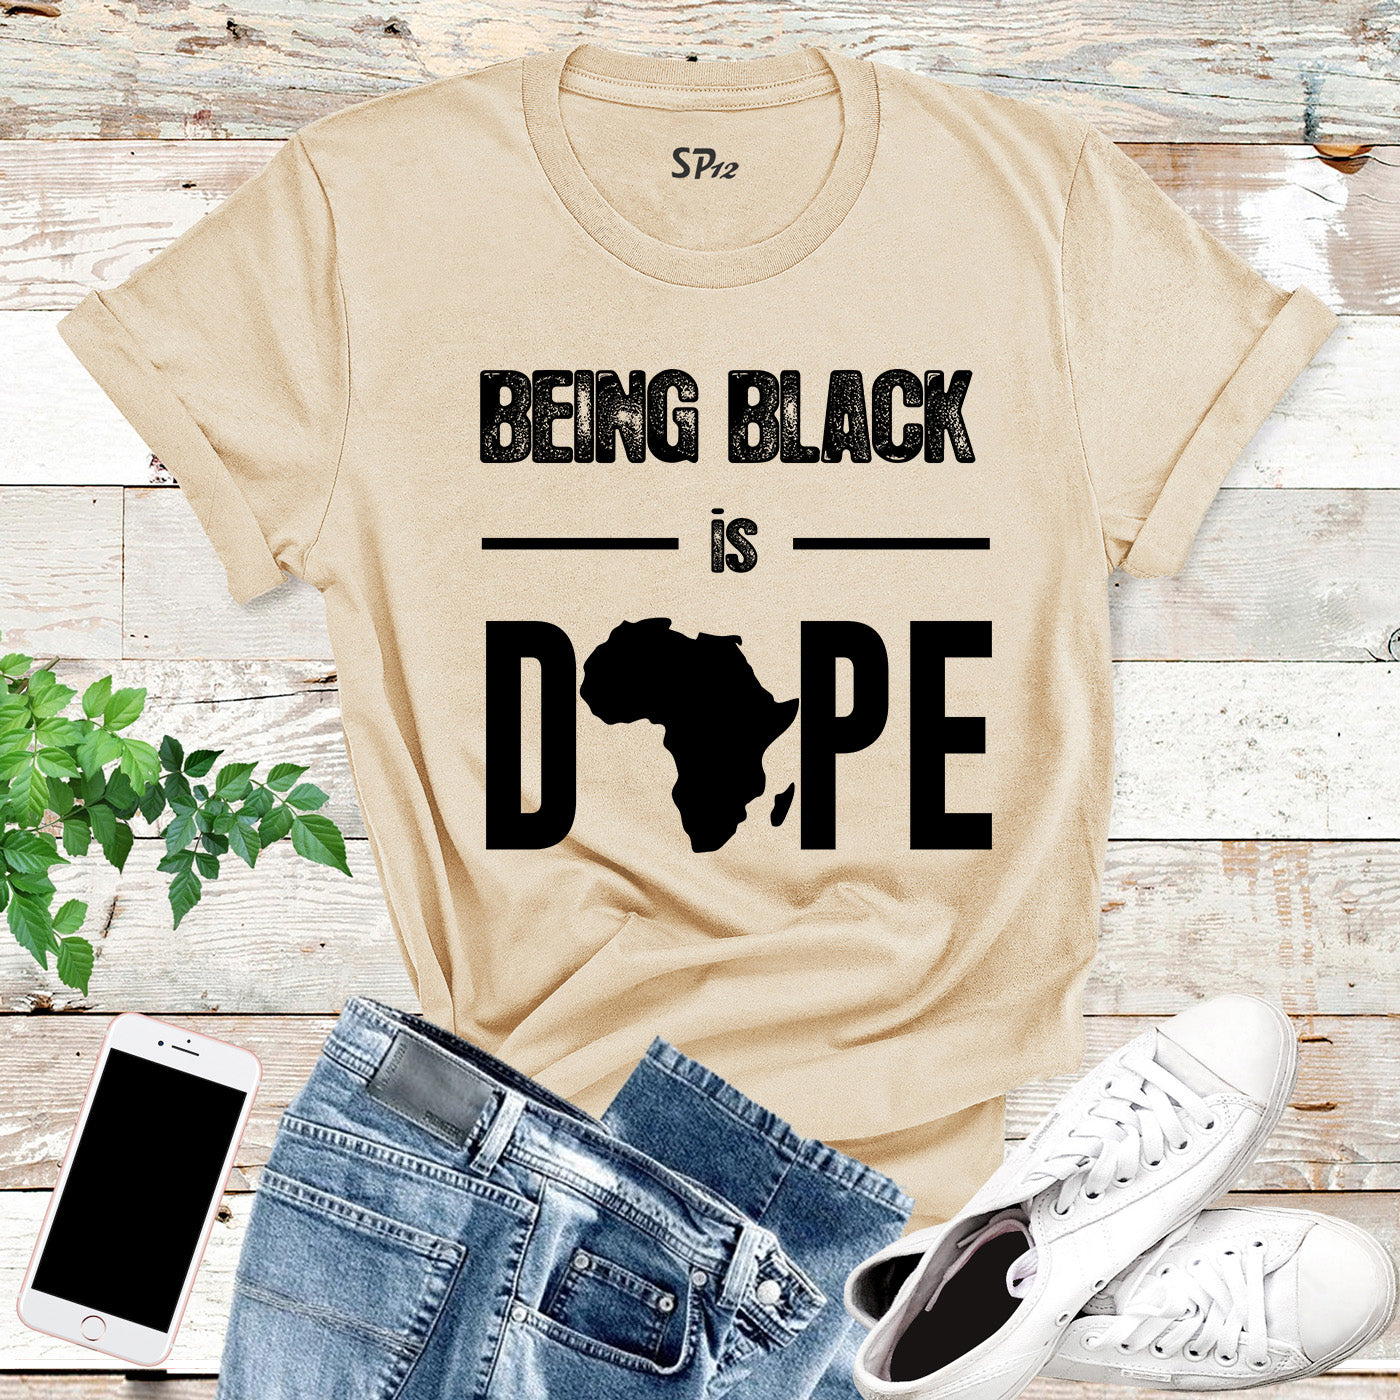 Being Black is Dope T Shirt